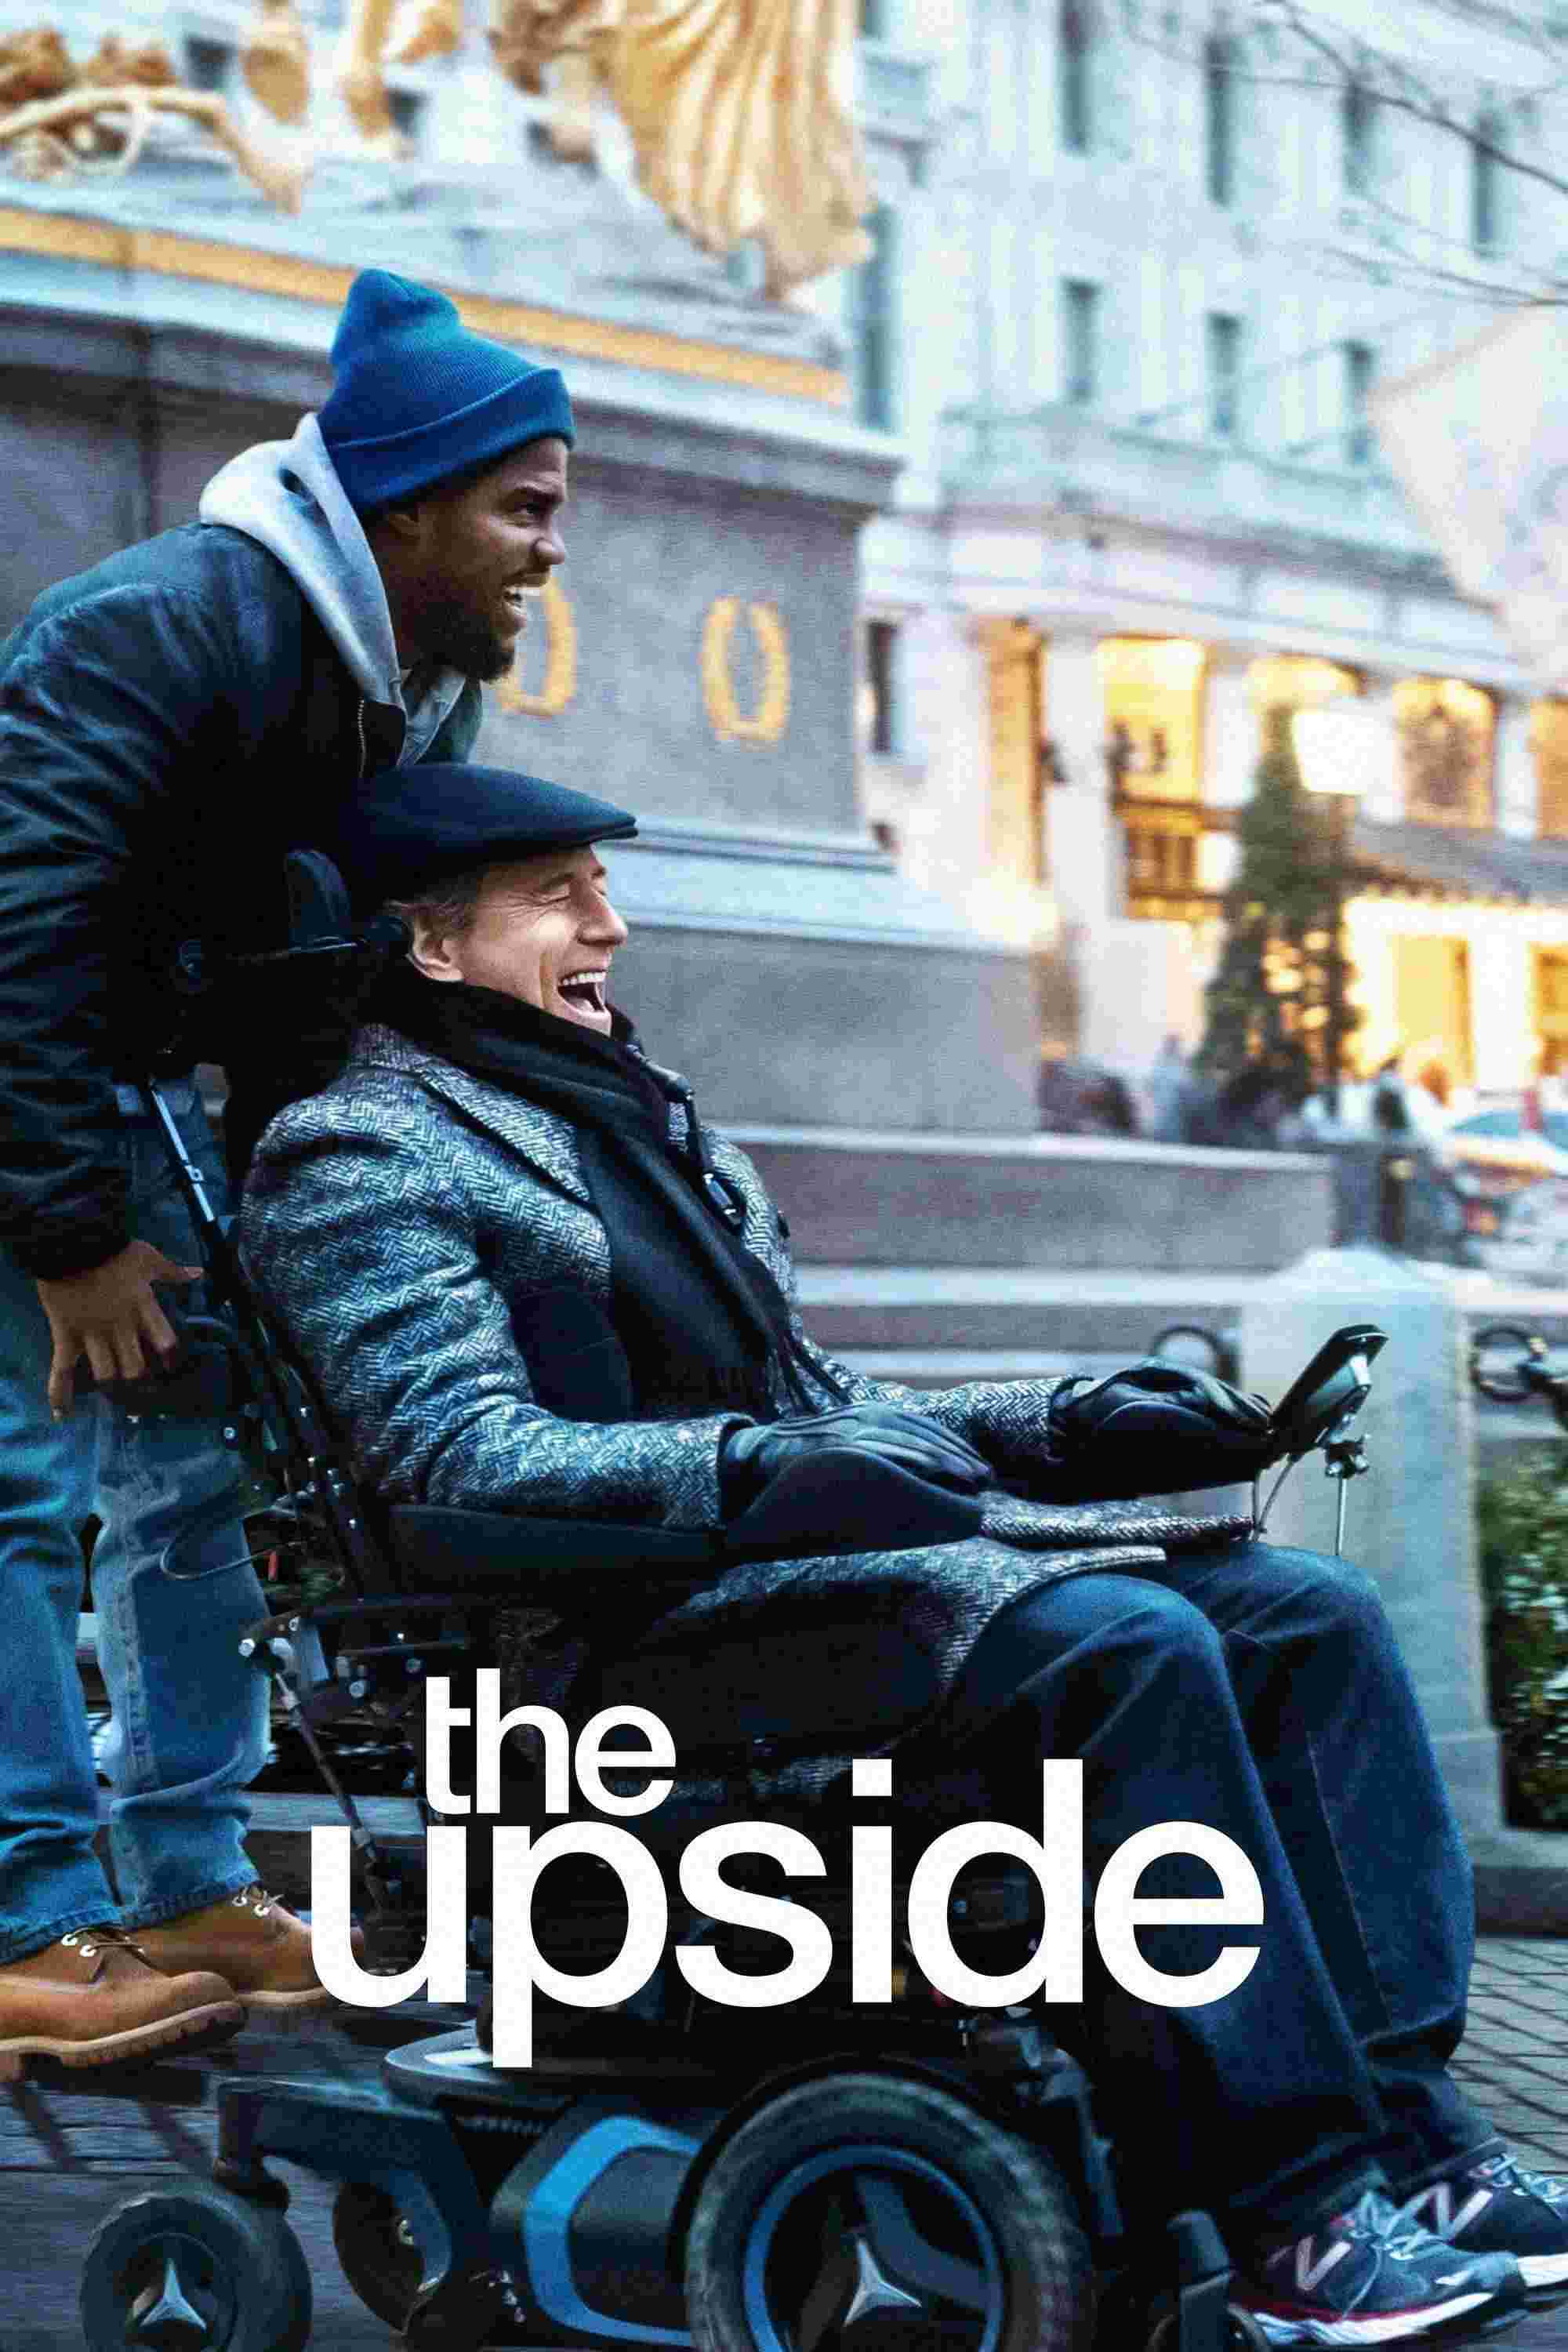 The Upside (2017) Kevin Hart